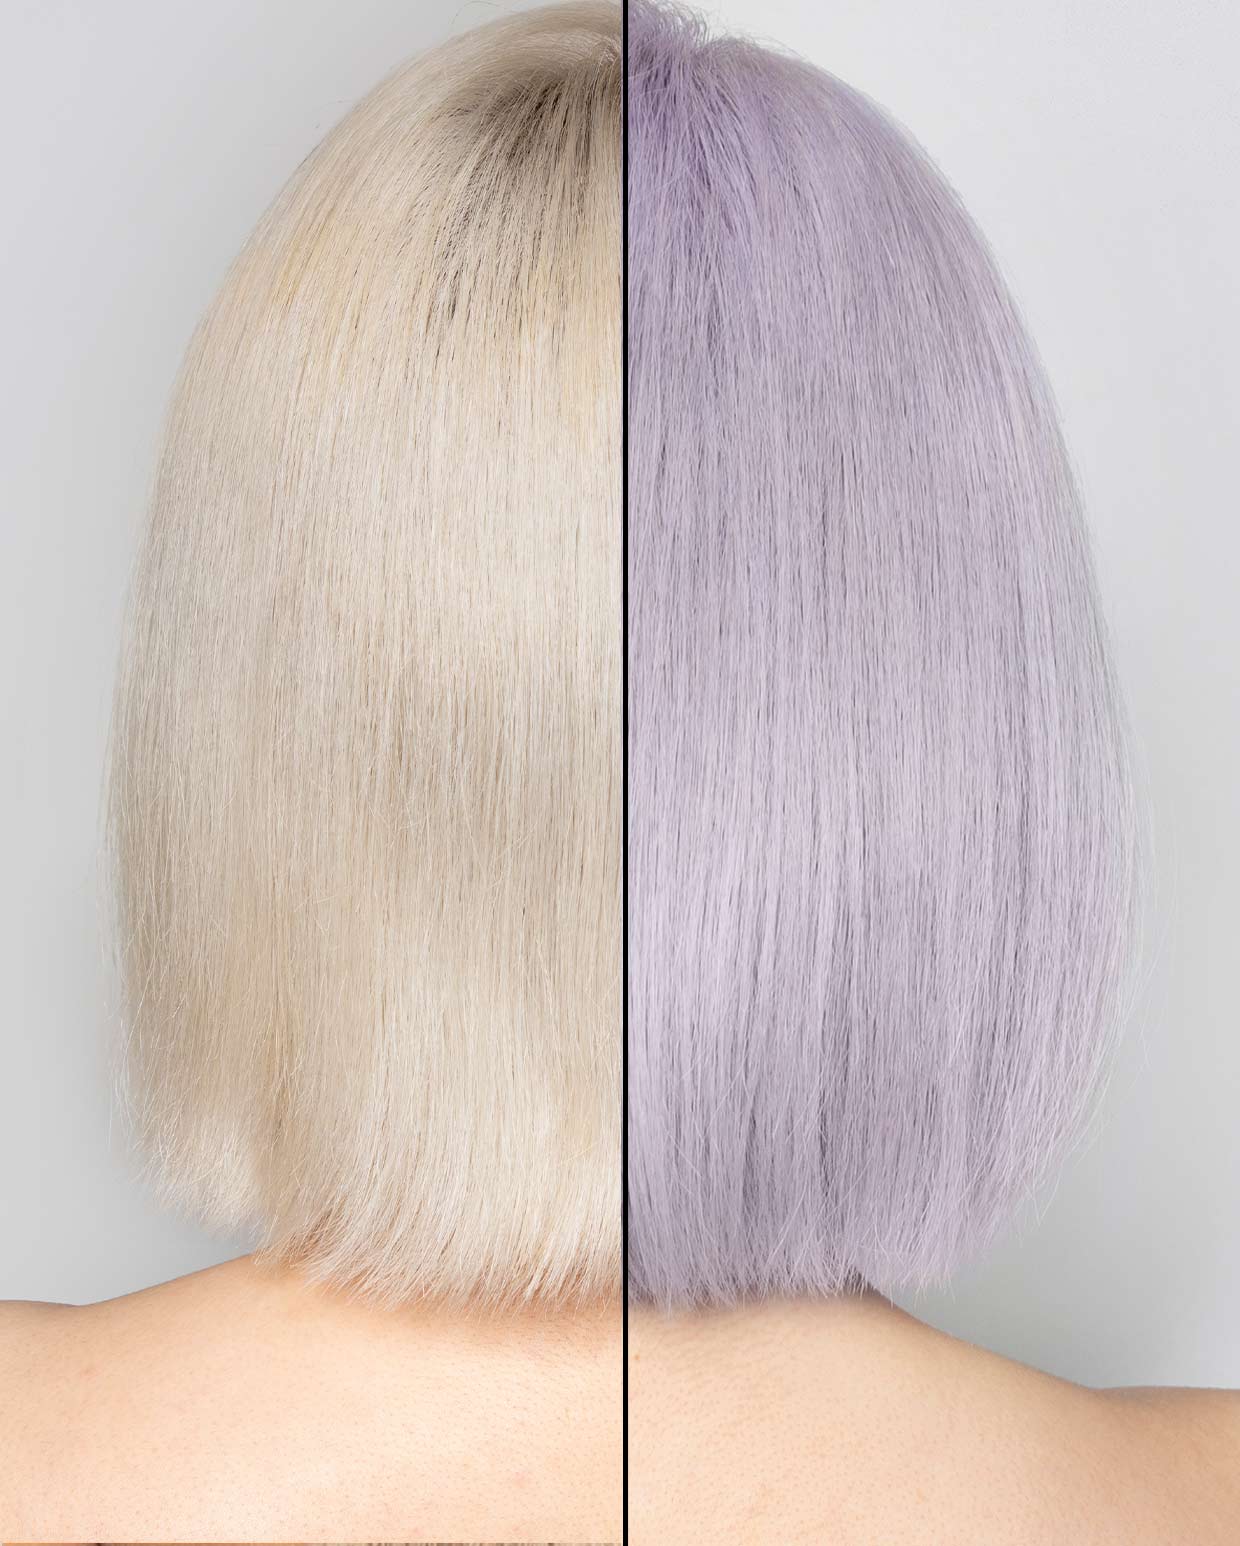 shrine_DROP IT_Product_image_lilac_blonde_hair